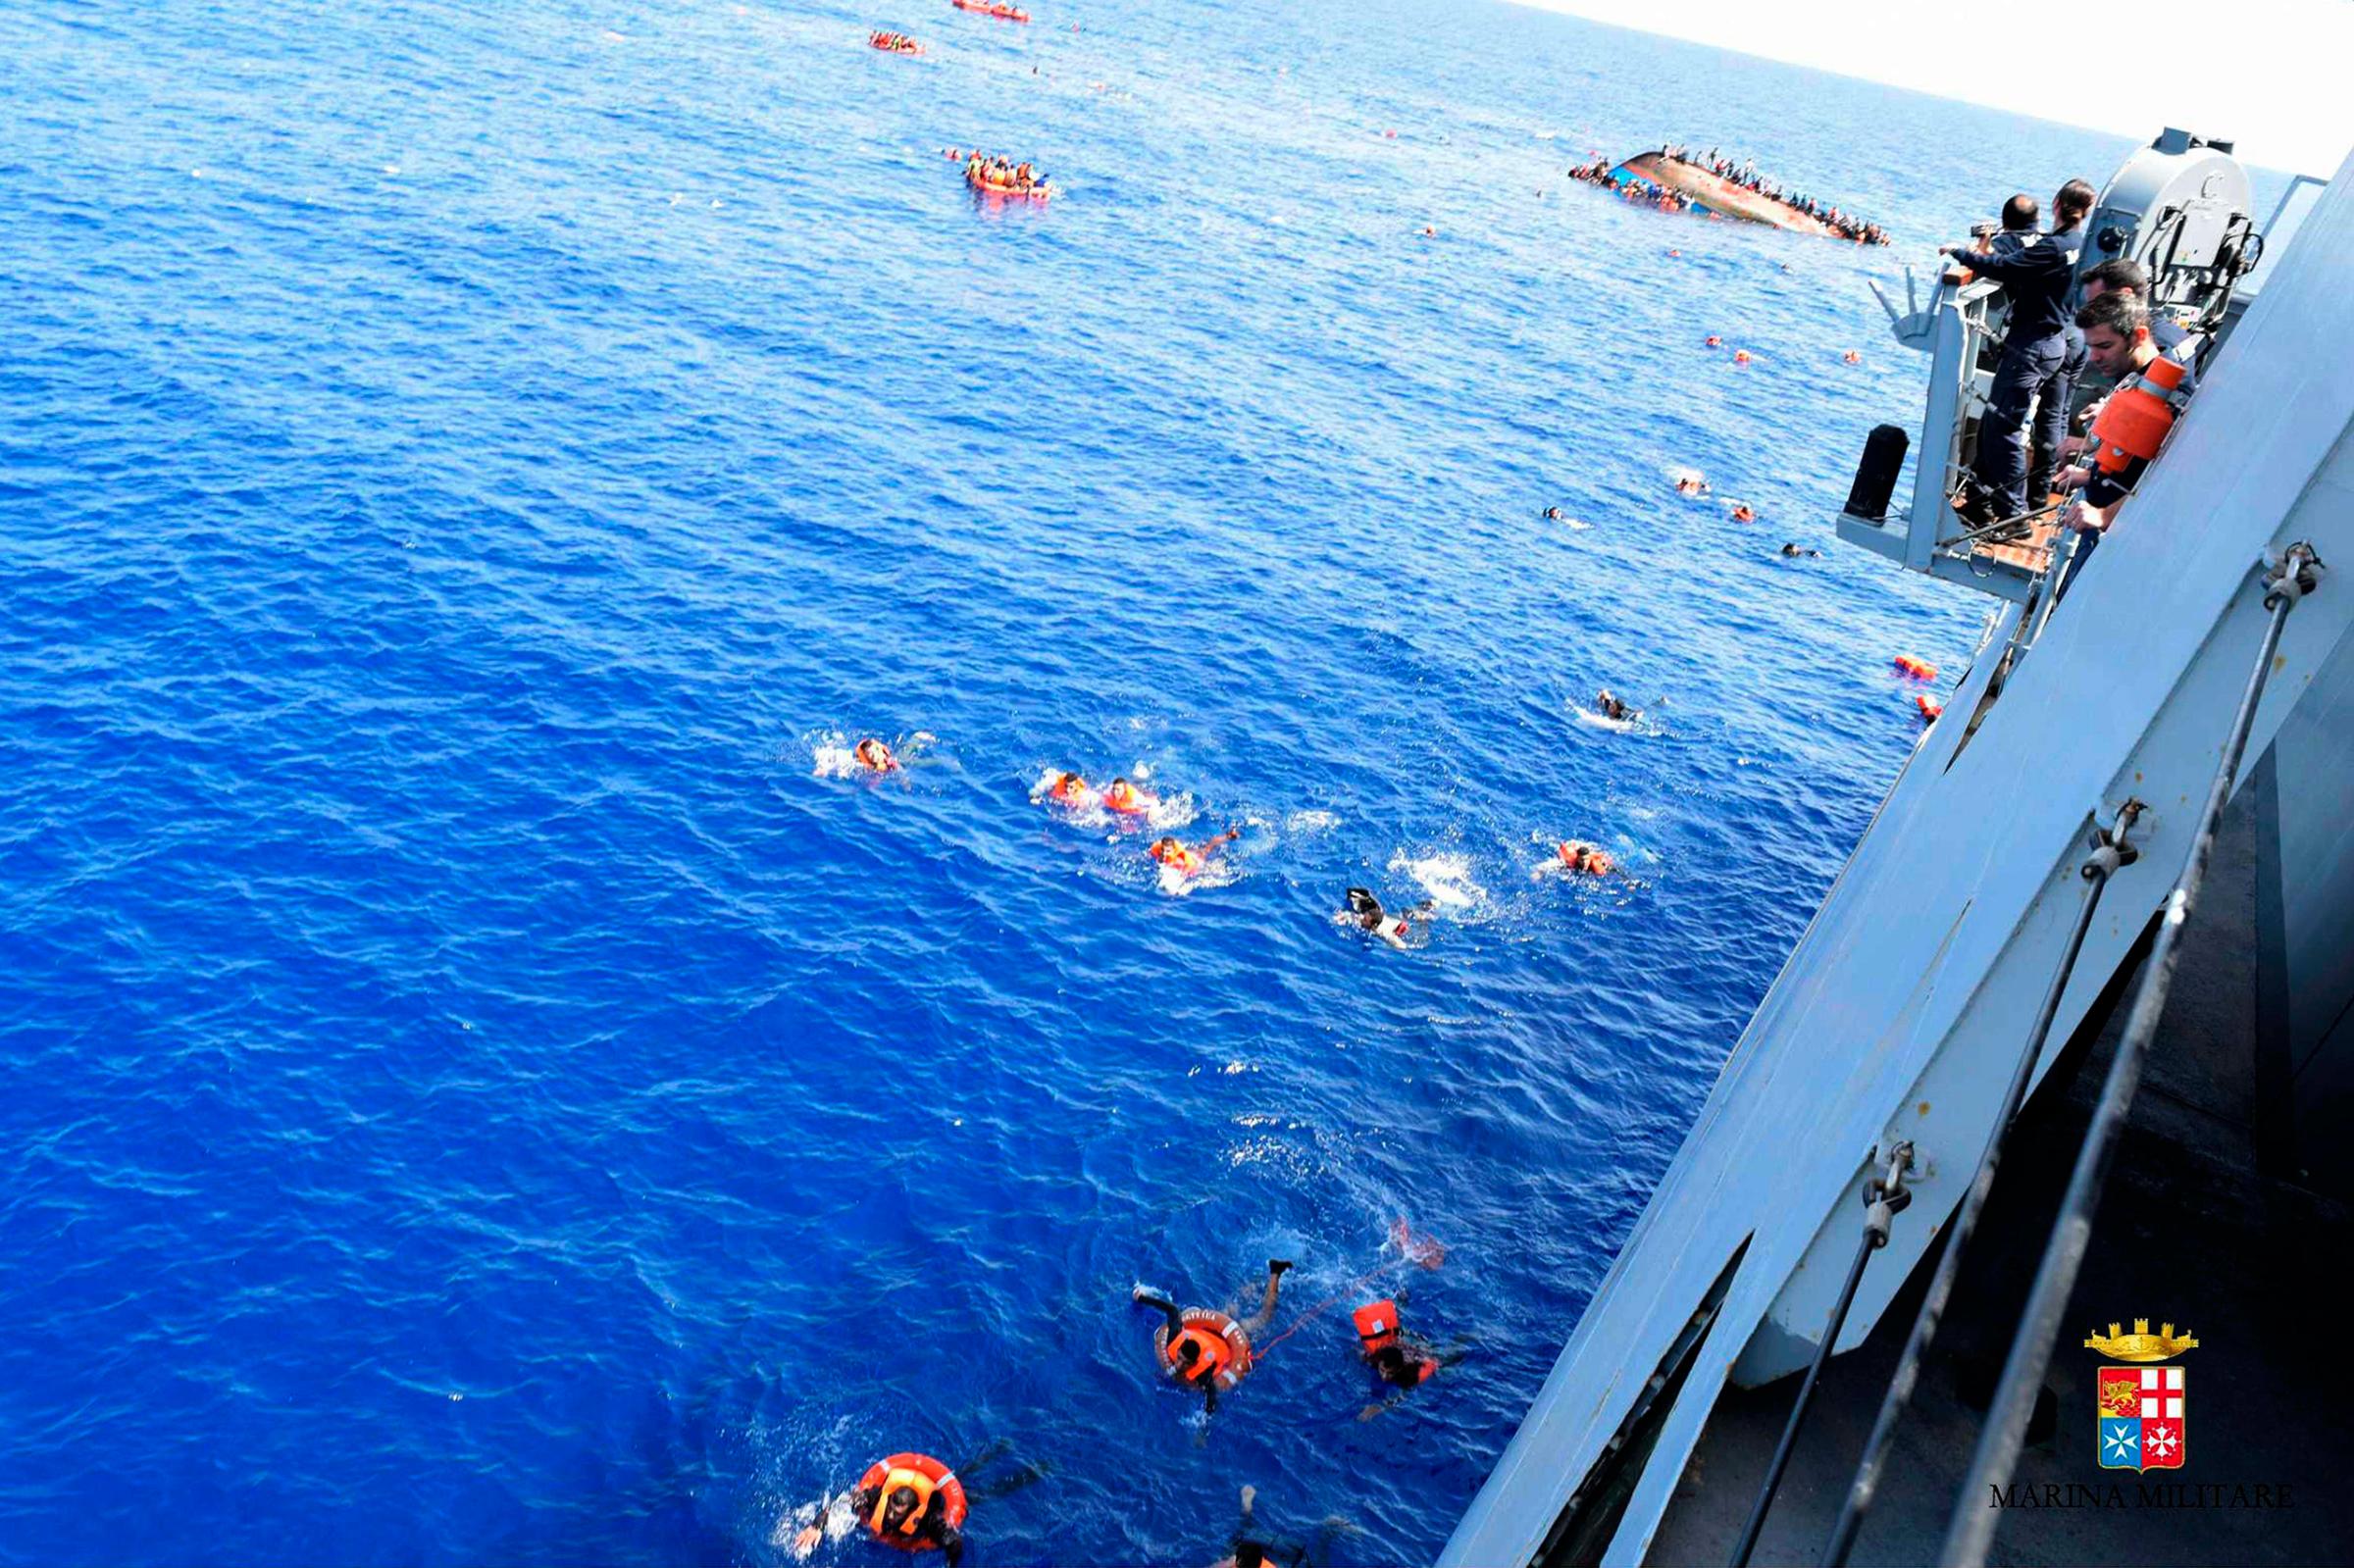 TOPSHOT-ITALY-REFUGEE-IMMIGRATION-SHIPWRECK-RESCUE